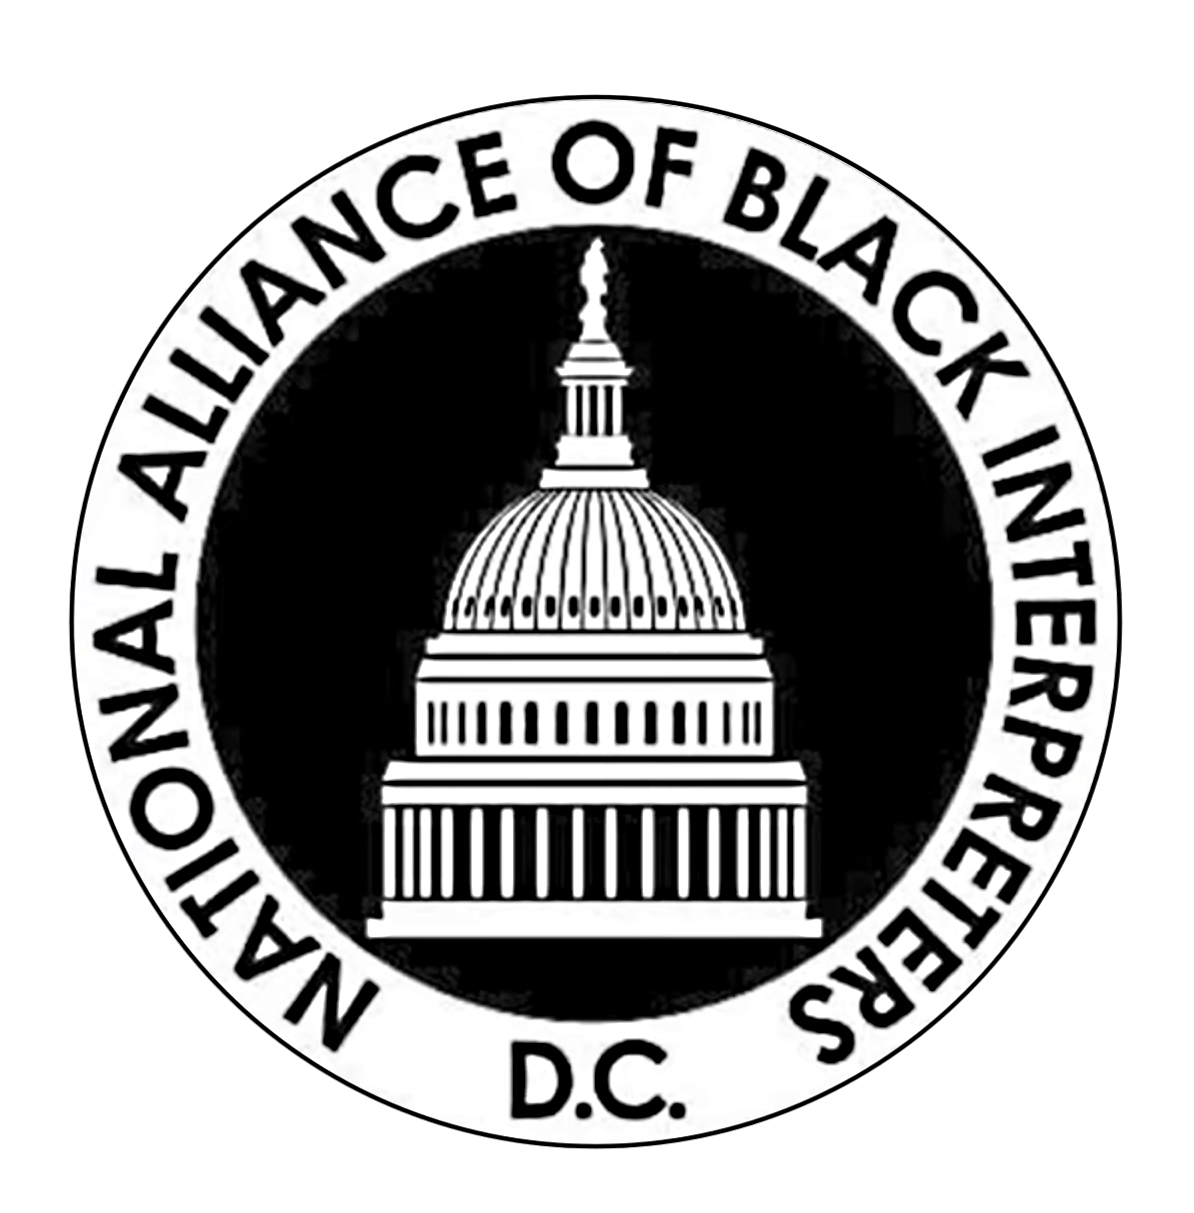 NAOBI-DC Logo: A thin white circular boarder with black text “National Alliance of Black Interpreters D.C.”. Inside the white circle is a black one overlayed with a white print of The United States Capitol building.